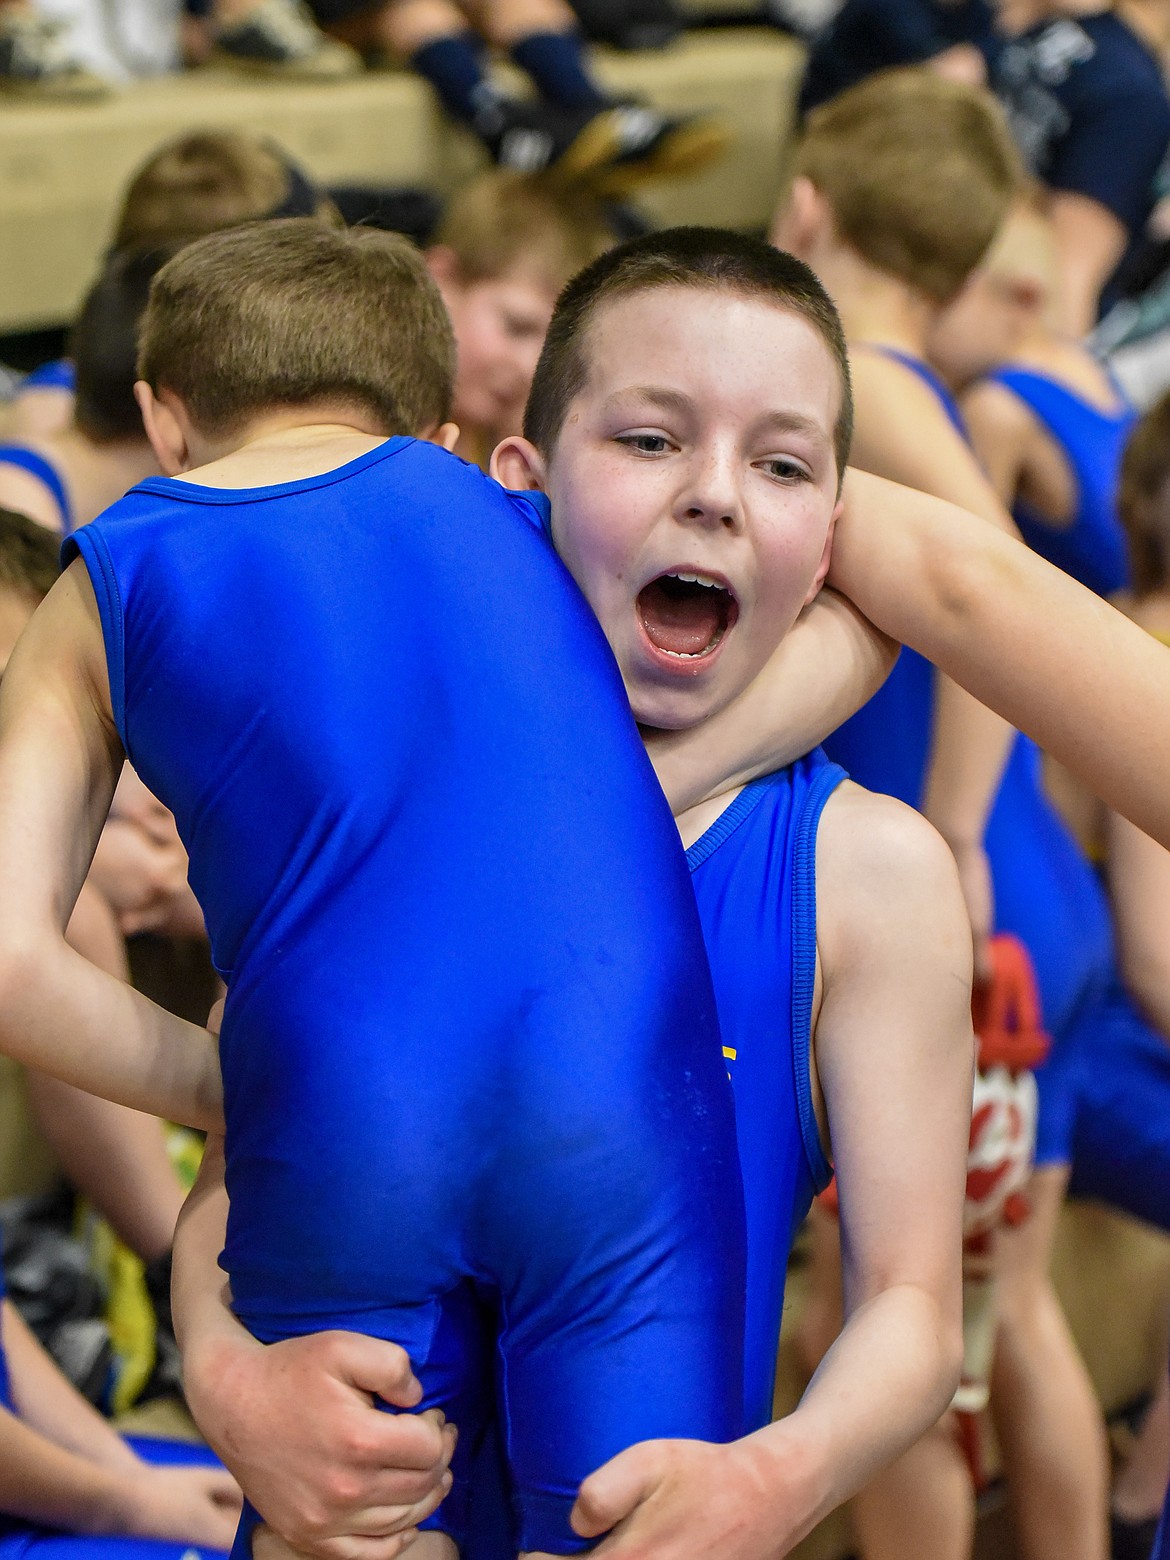 Hunter Rooney of Libby lifts another Greenchain wrestler in an energetic moment between matches at the Kootenai Klassic Wrestling Tournament Saturday. (Ben Kibbey/The Western News)